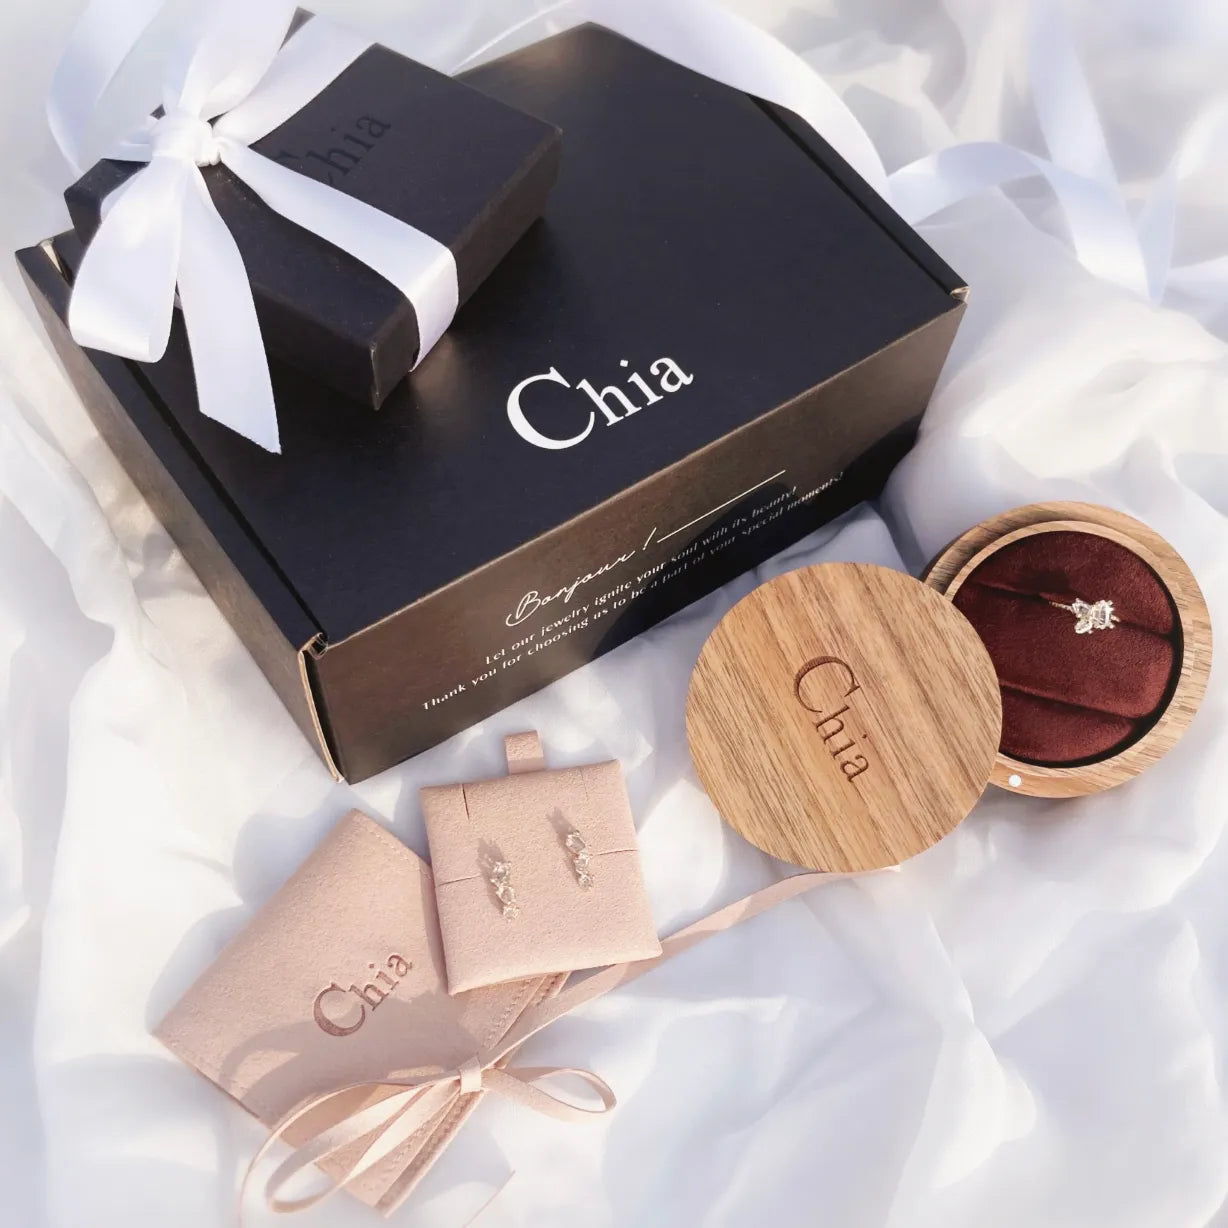 Chia Jewelry packaging introduction